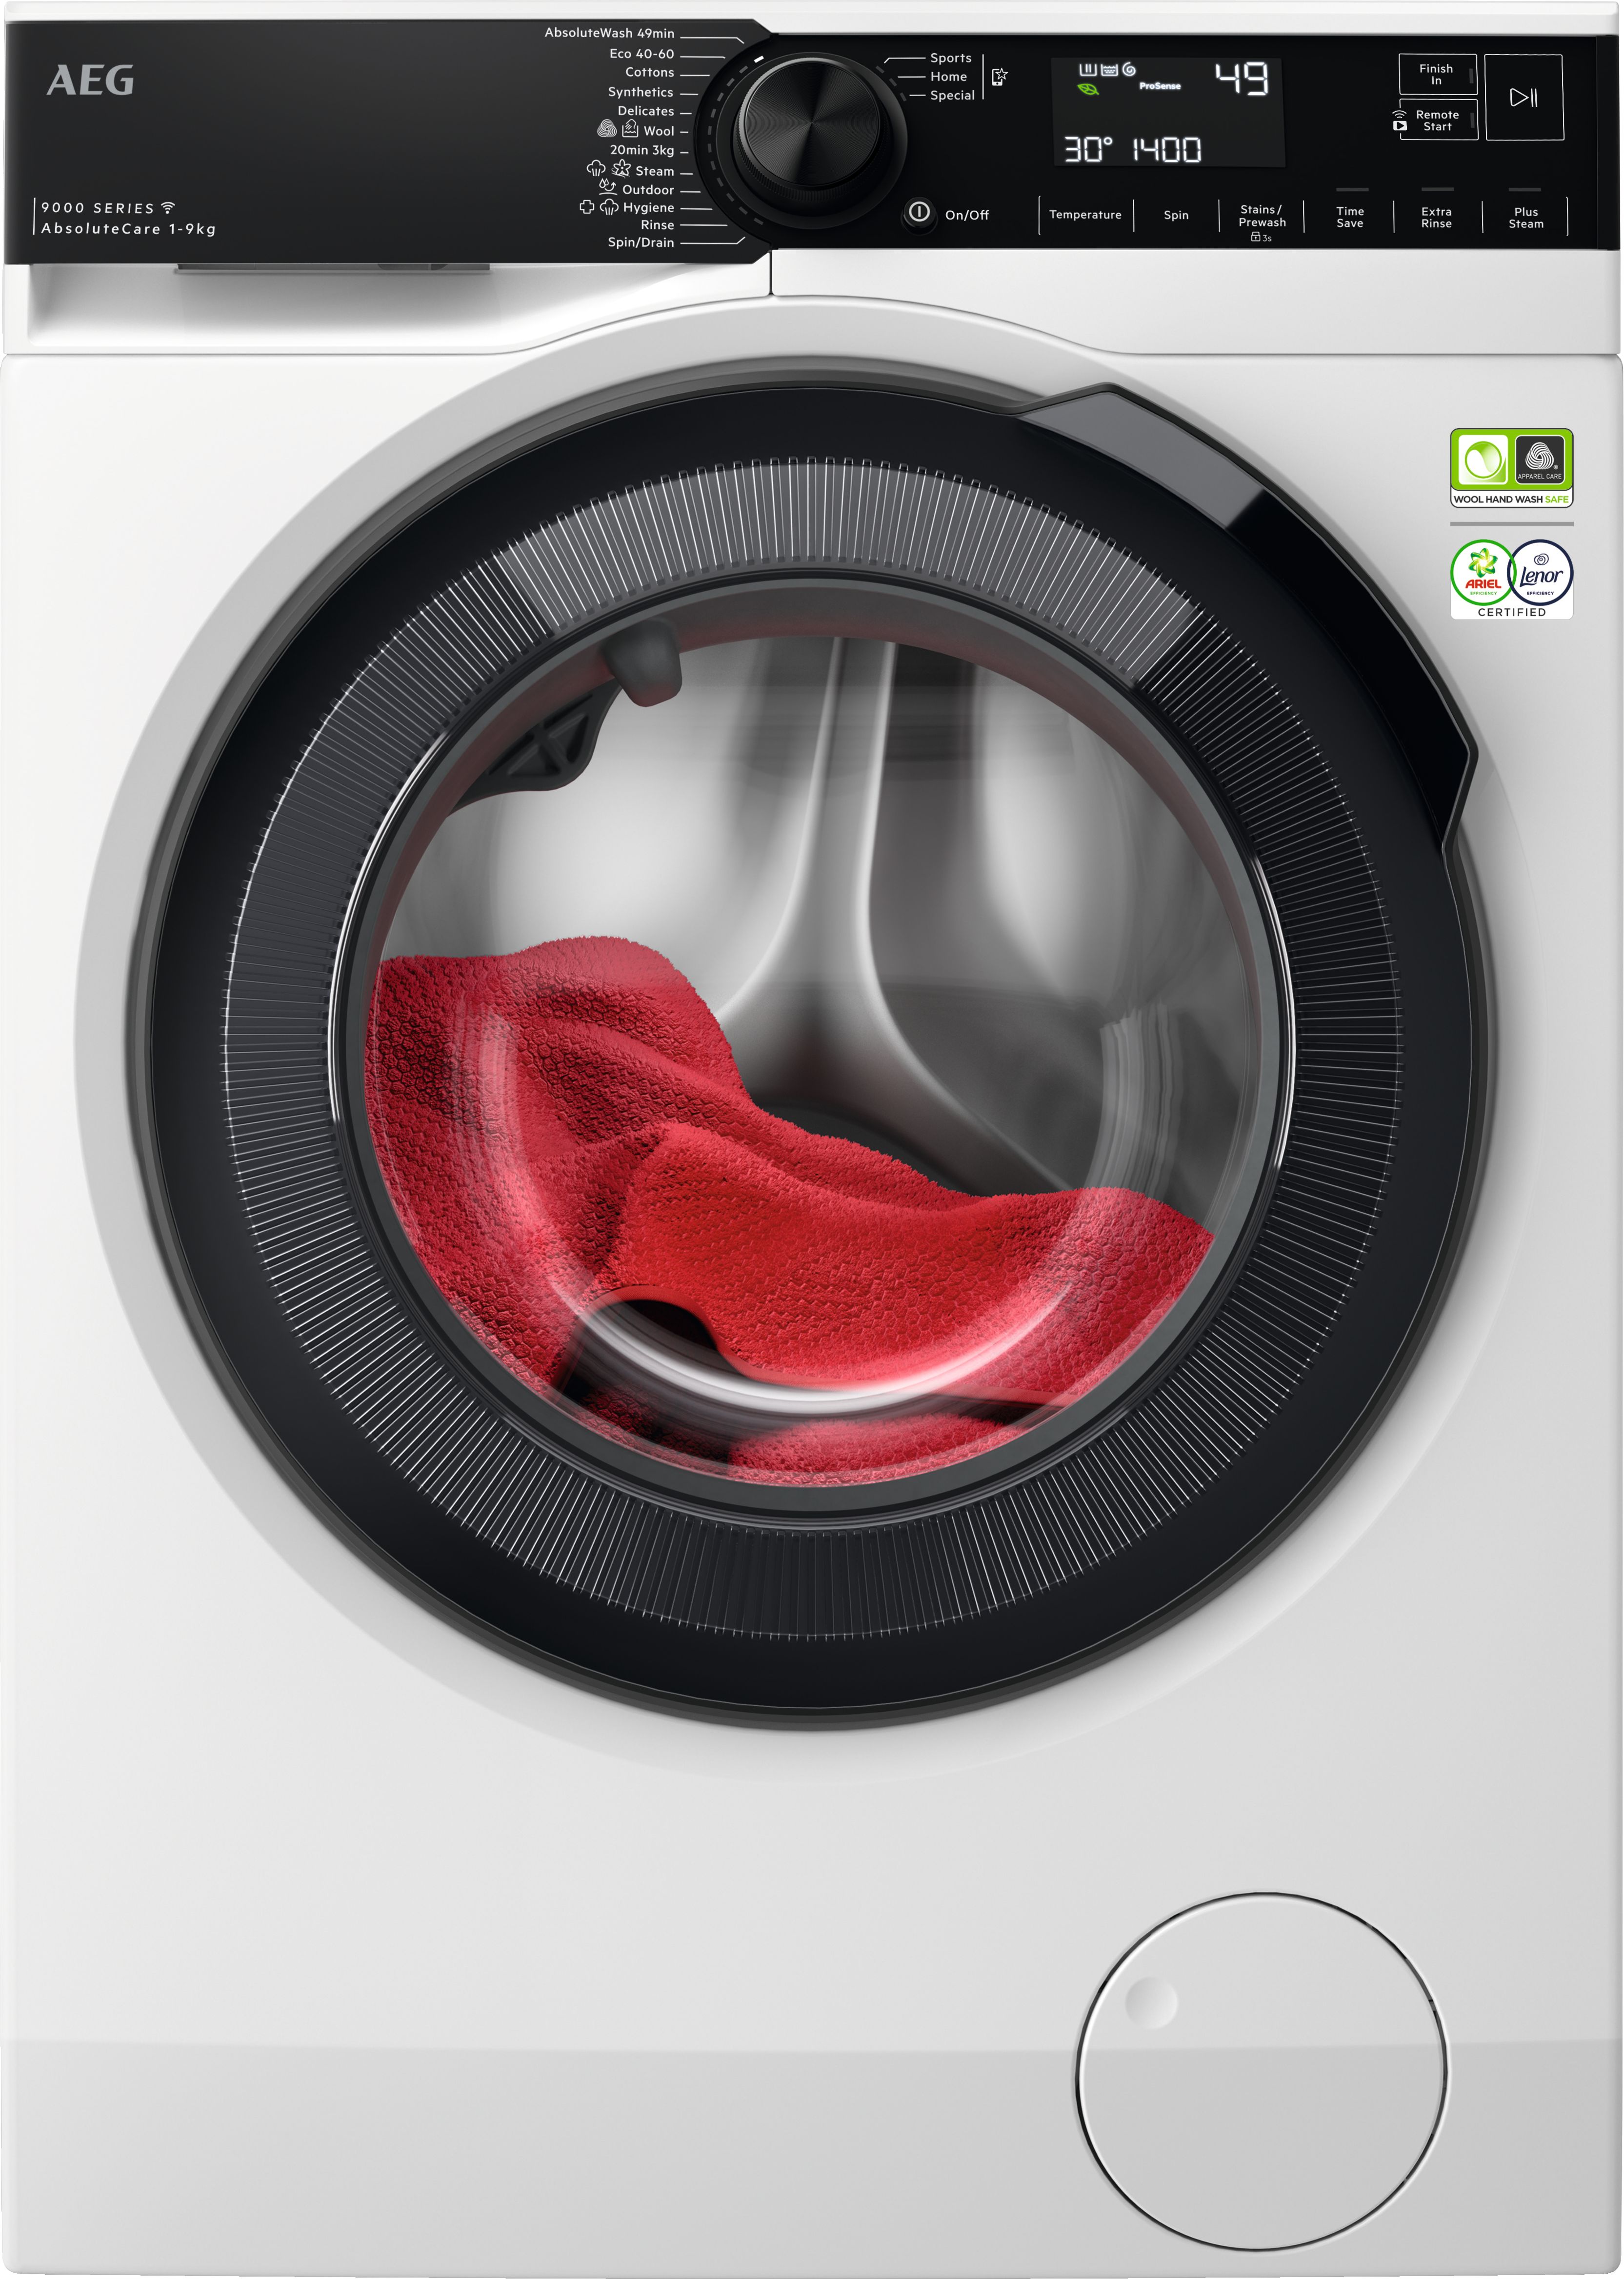 AEG 9000 AbsoluteCare LFR94946WS 9kg Washing Machine with 1400 rpm - White - A Rated, White